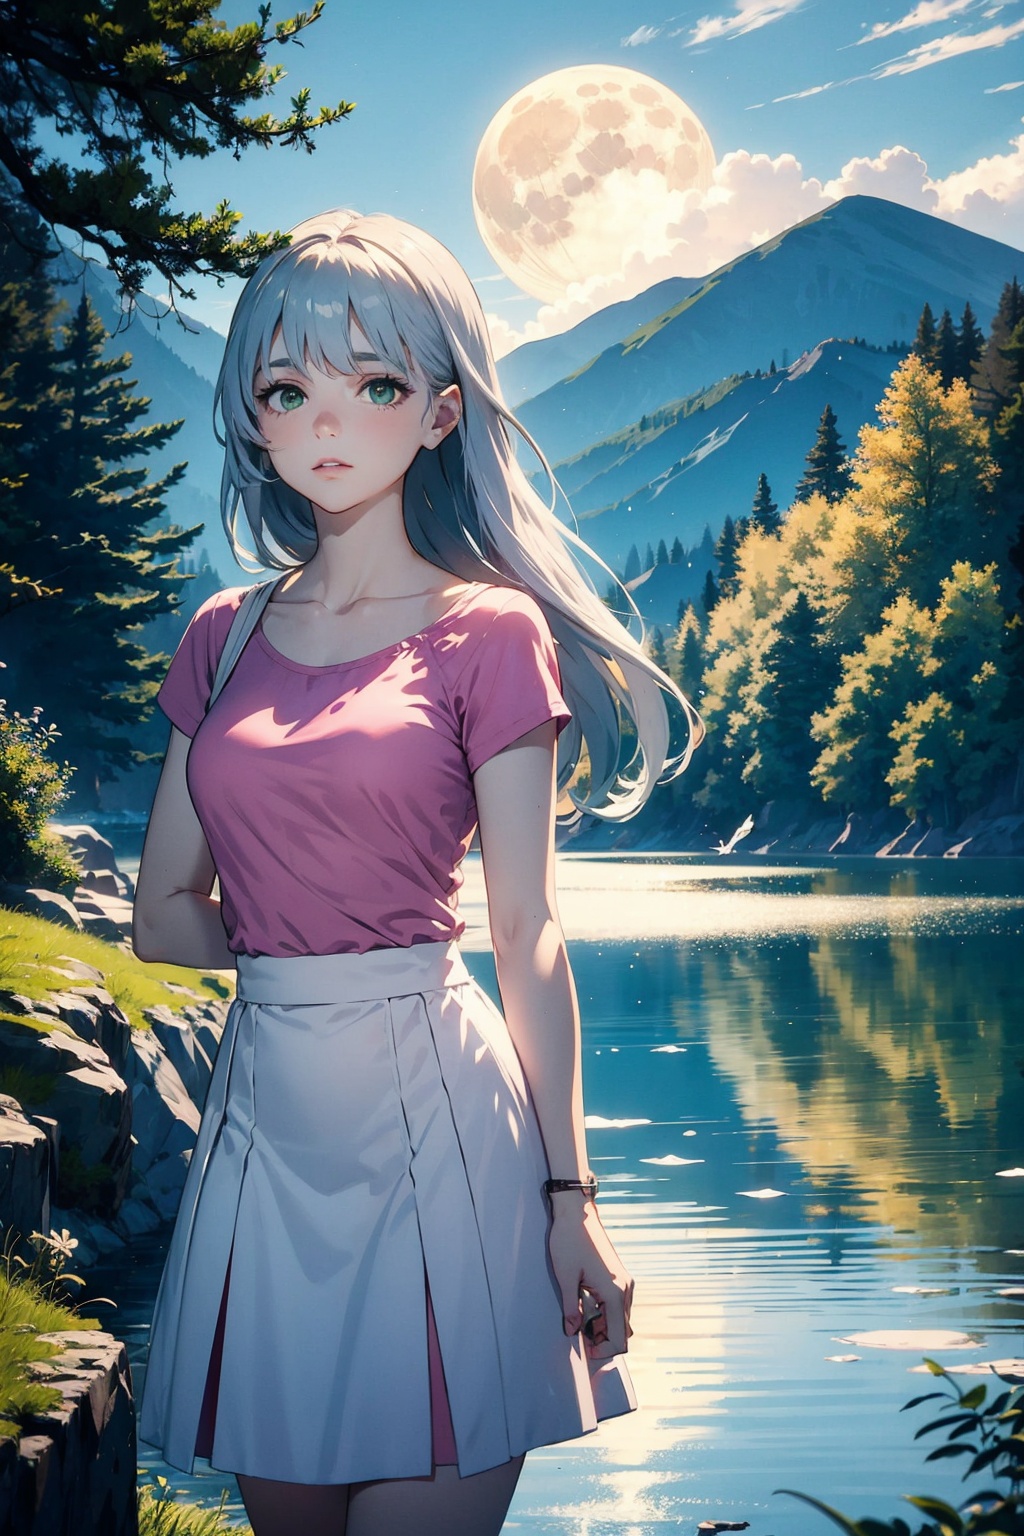 masterpiece,best quality,cinematic lighting,extremely detailed CG unity 8k wallpaper,.1girl,Silver long hair,flowing long hair,green eyes,pink clothes,white skirt,side gaze towards the camera,looking towards the camera,by the lake,in the wilderness,in the surrounding forests,full moon in the sky,moonlight reflected in the lake,lake reflections,distant mountains,birds,clouds.Evening,sunny,summer.Half-length photo,